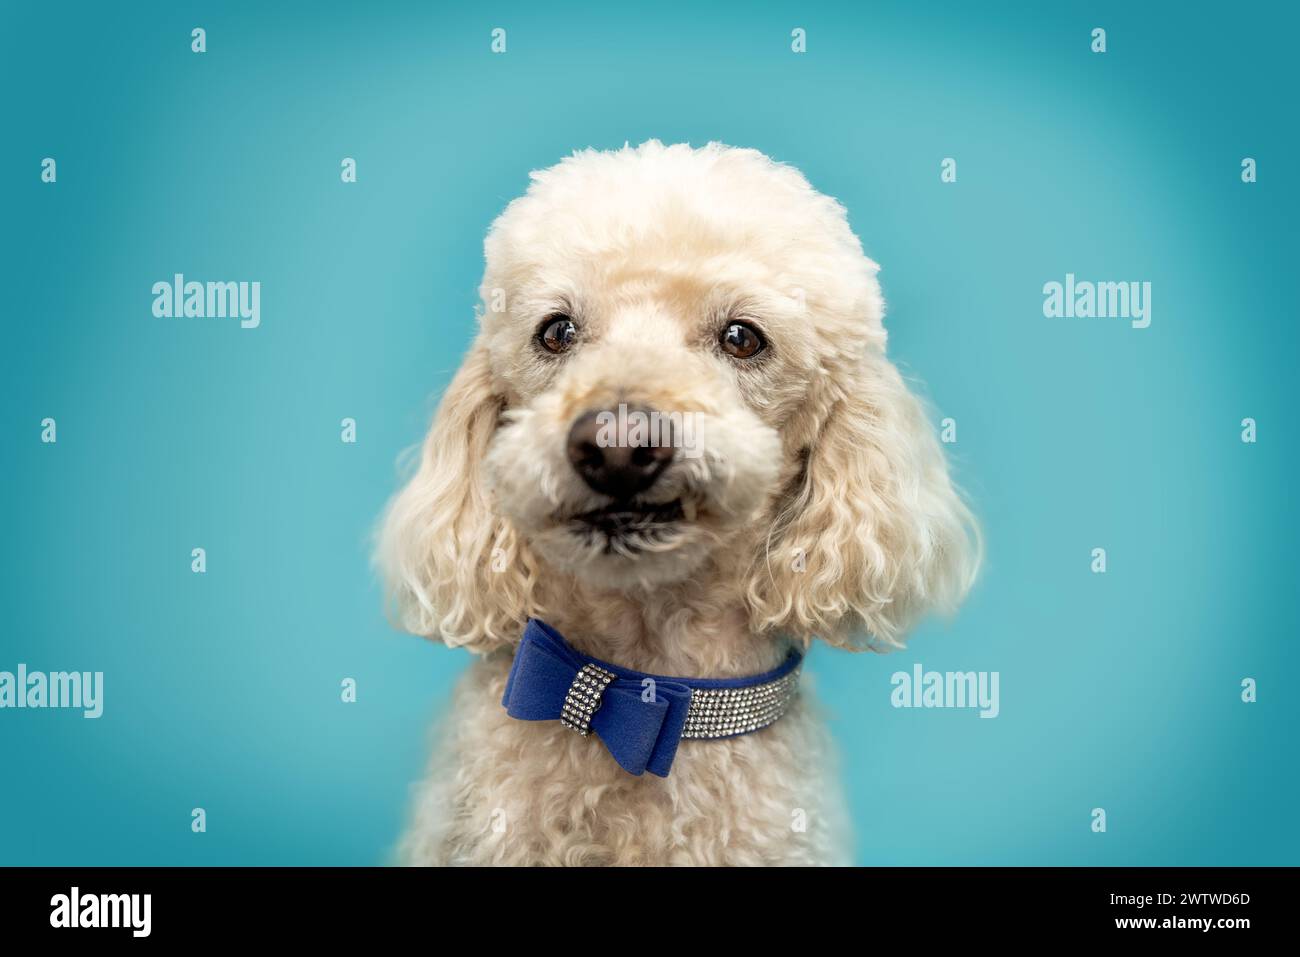 A white poodle dog in front of a colorful blue studio background Stock Photo